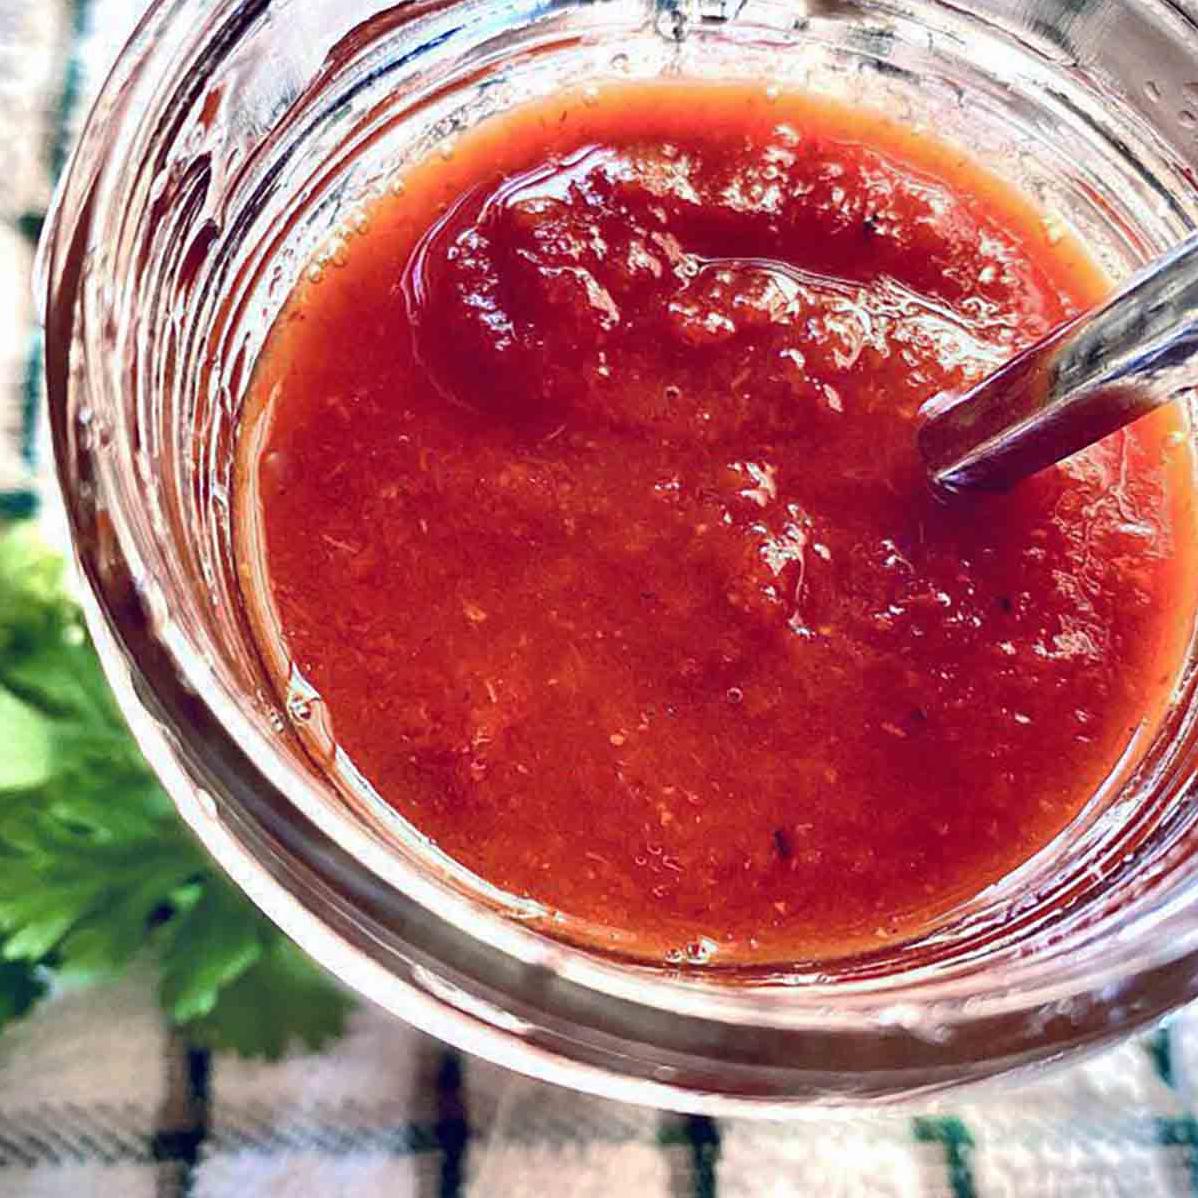  Spice up your enchiladas with this deliciously rich red sauce.